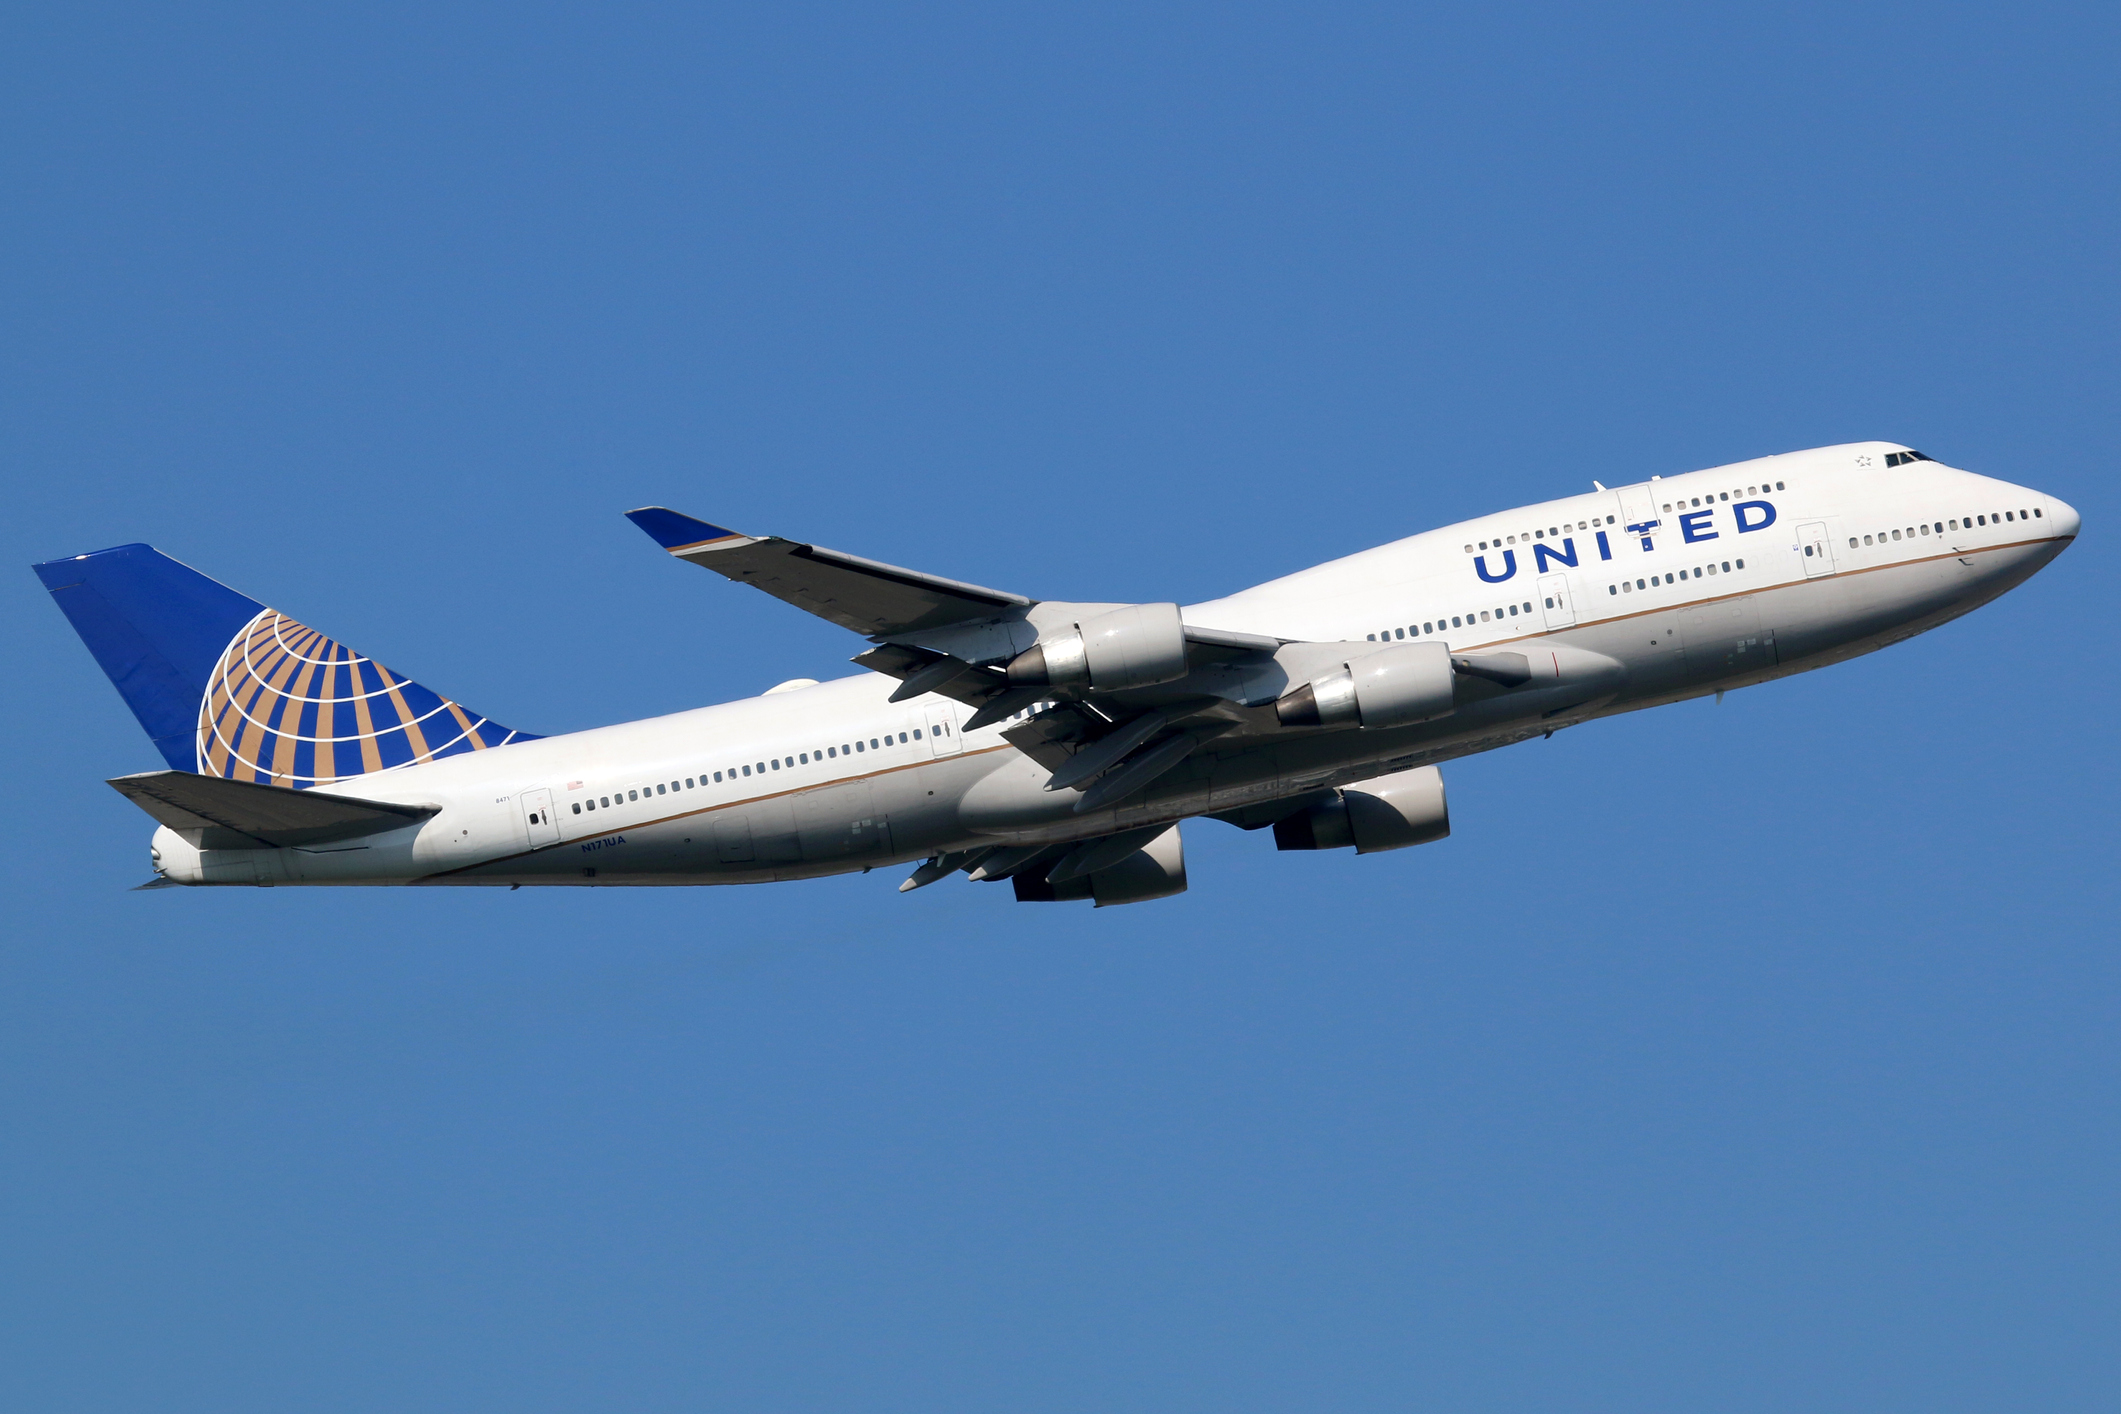 Frankfurt, Germany - September 17, 2014: A United Airlines Boeing 747 Jumbo Jet with the registration N171UA taking off from Frankfurt International Airport (FRA). United Airlines is the world's largest airline with some 693 planes and 138 million passengers.